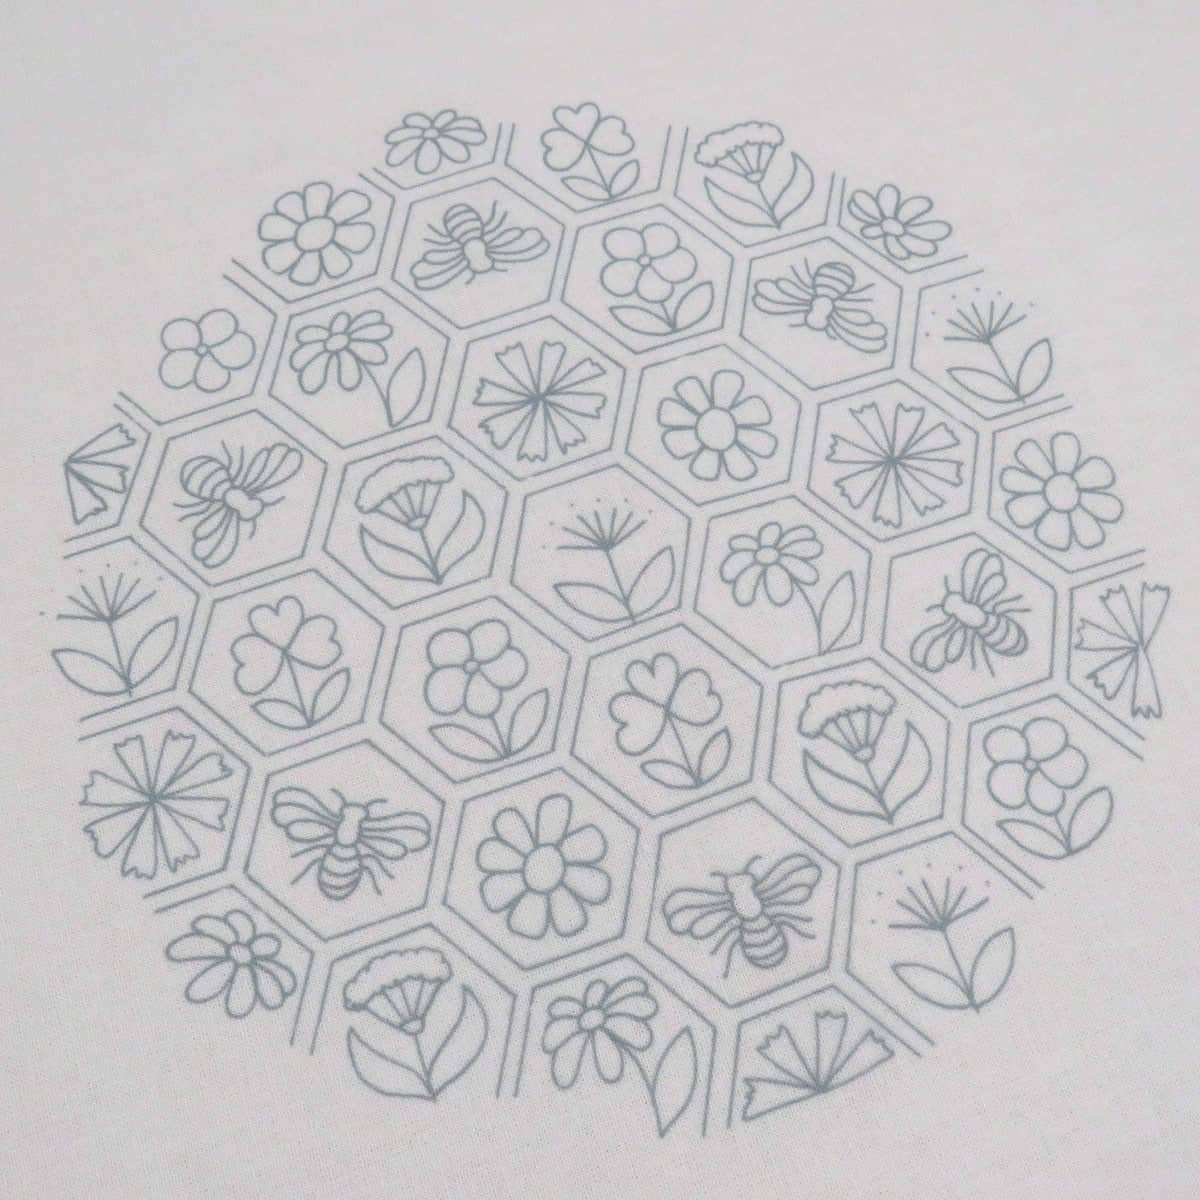 Flower Hive, Pre Printed Embroidery Fabric Panel , Pre Printed Fabric Pattern , StitchDoodles , embroidery hoop kit, embroidery kits for adults, embroidery kits for beginners, hand embroidery, hand embroidery fabric, modern embroidery kits, unique embroidery kits , StitchDoodles , shop.stitchdoodles.com